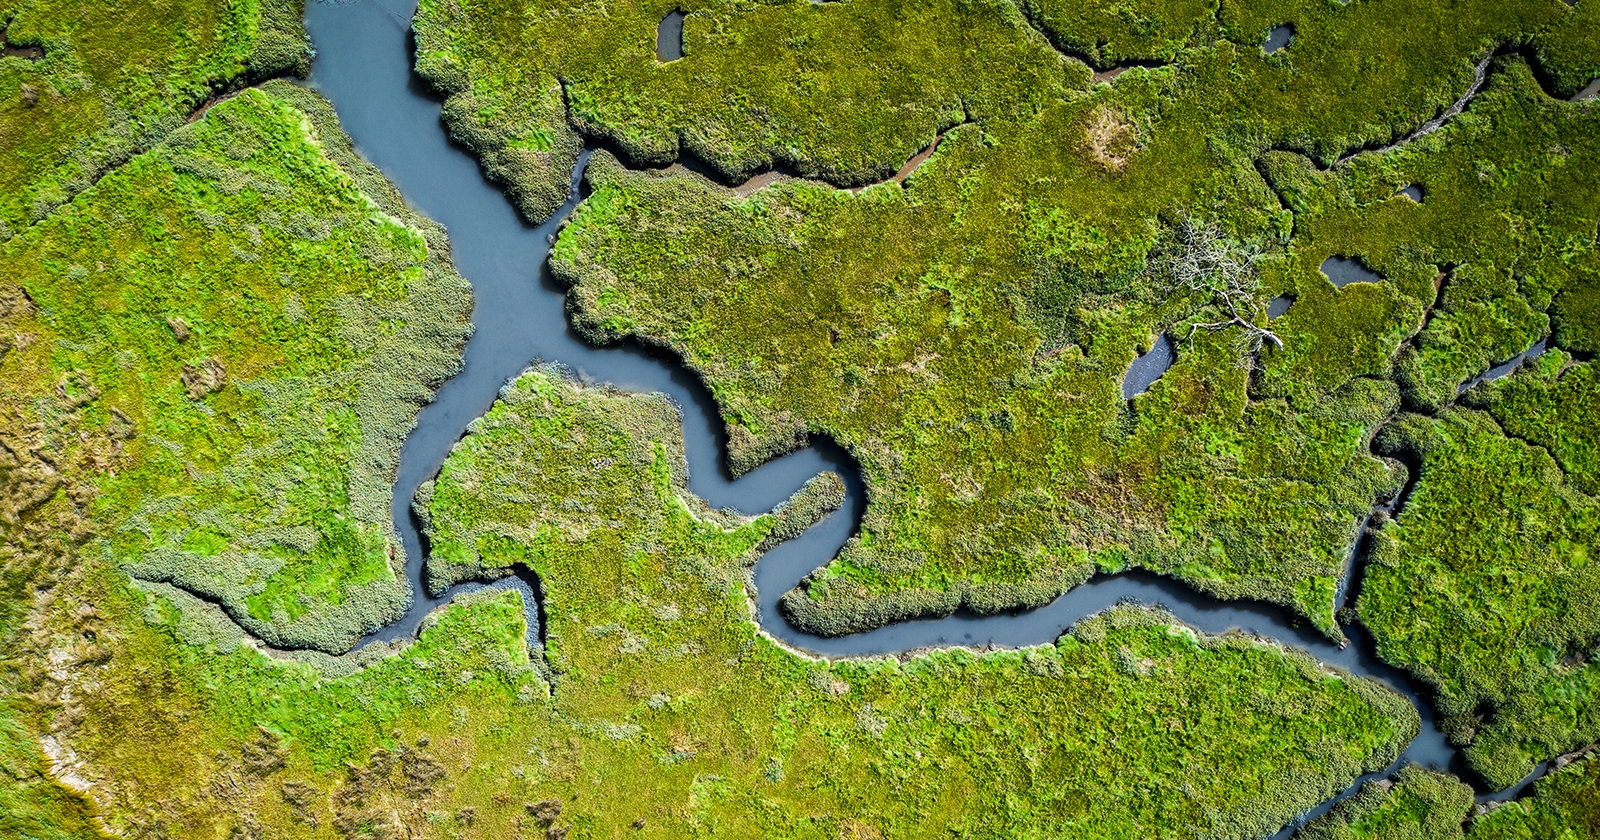 An aerial view of a river surrounded by green grass. Exponent exposure assessments, environmental forensics, and remediation support.